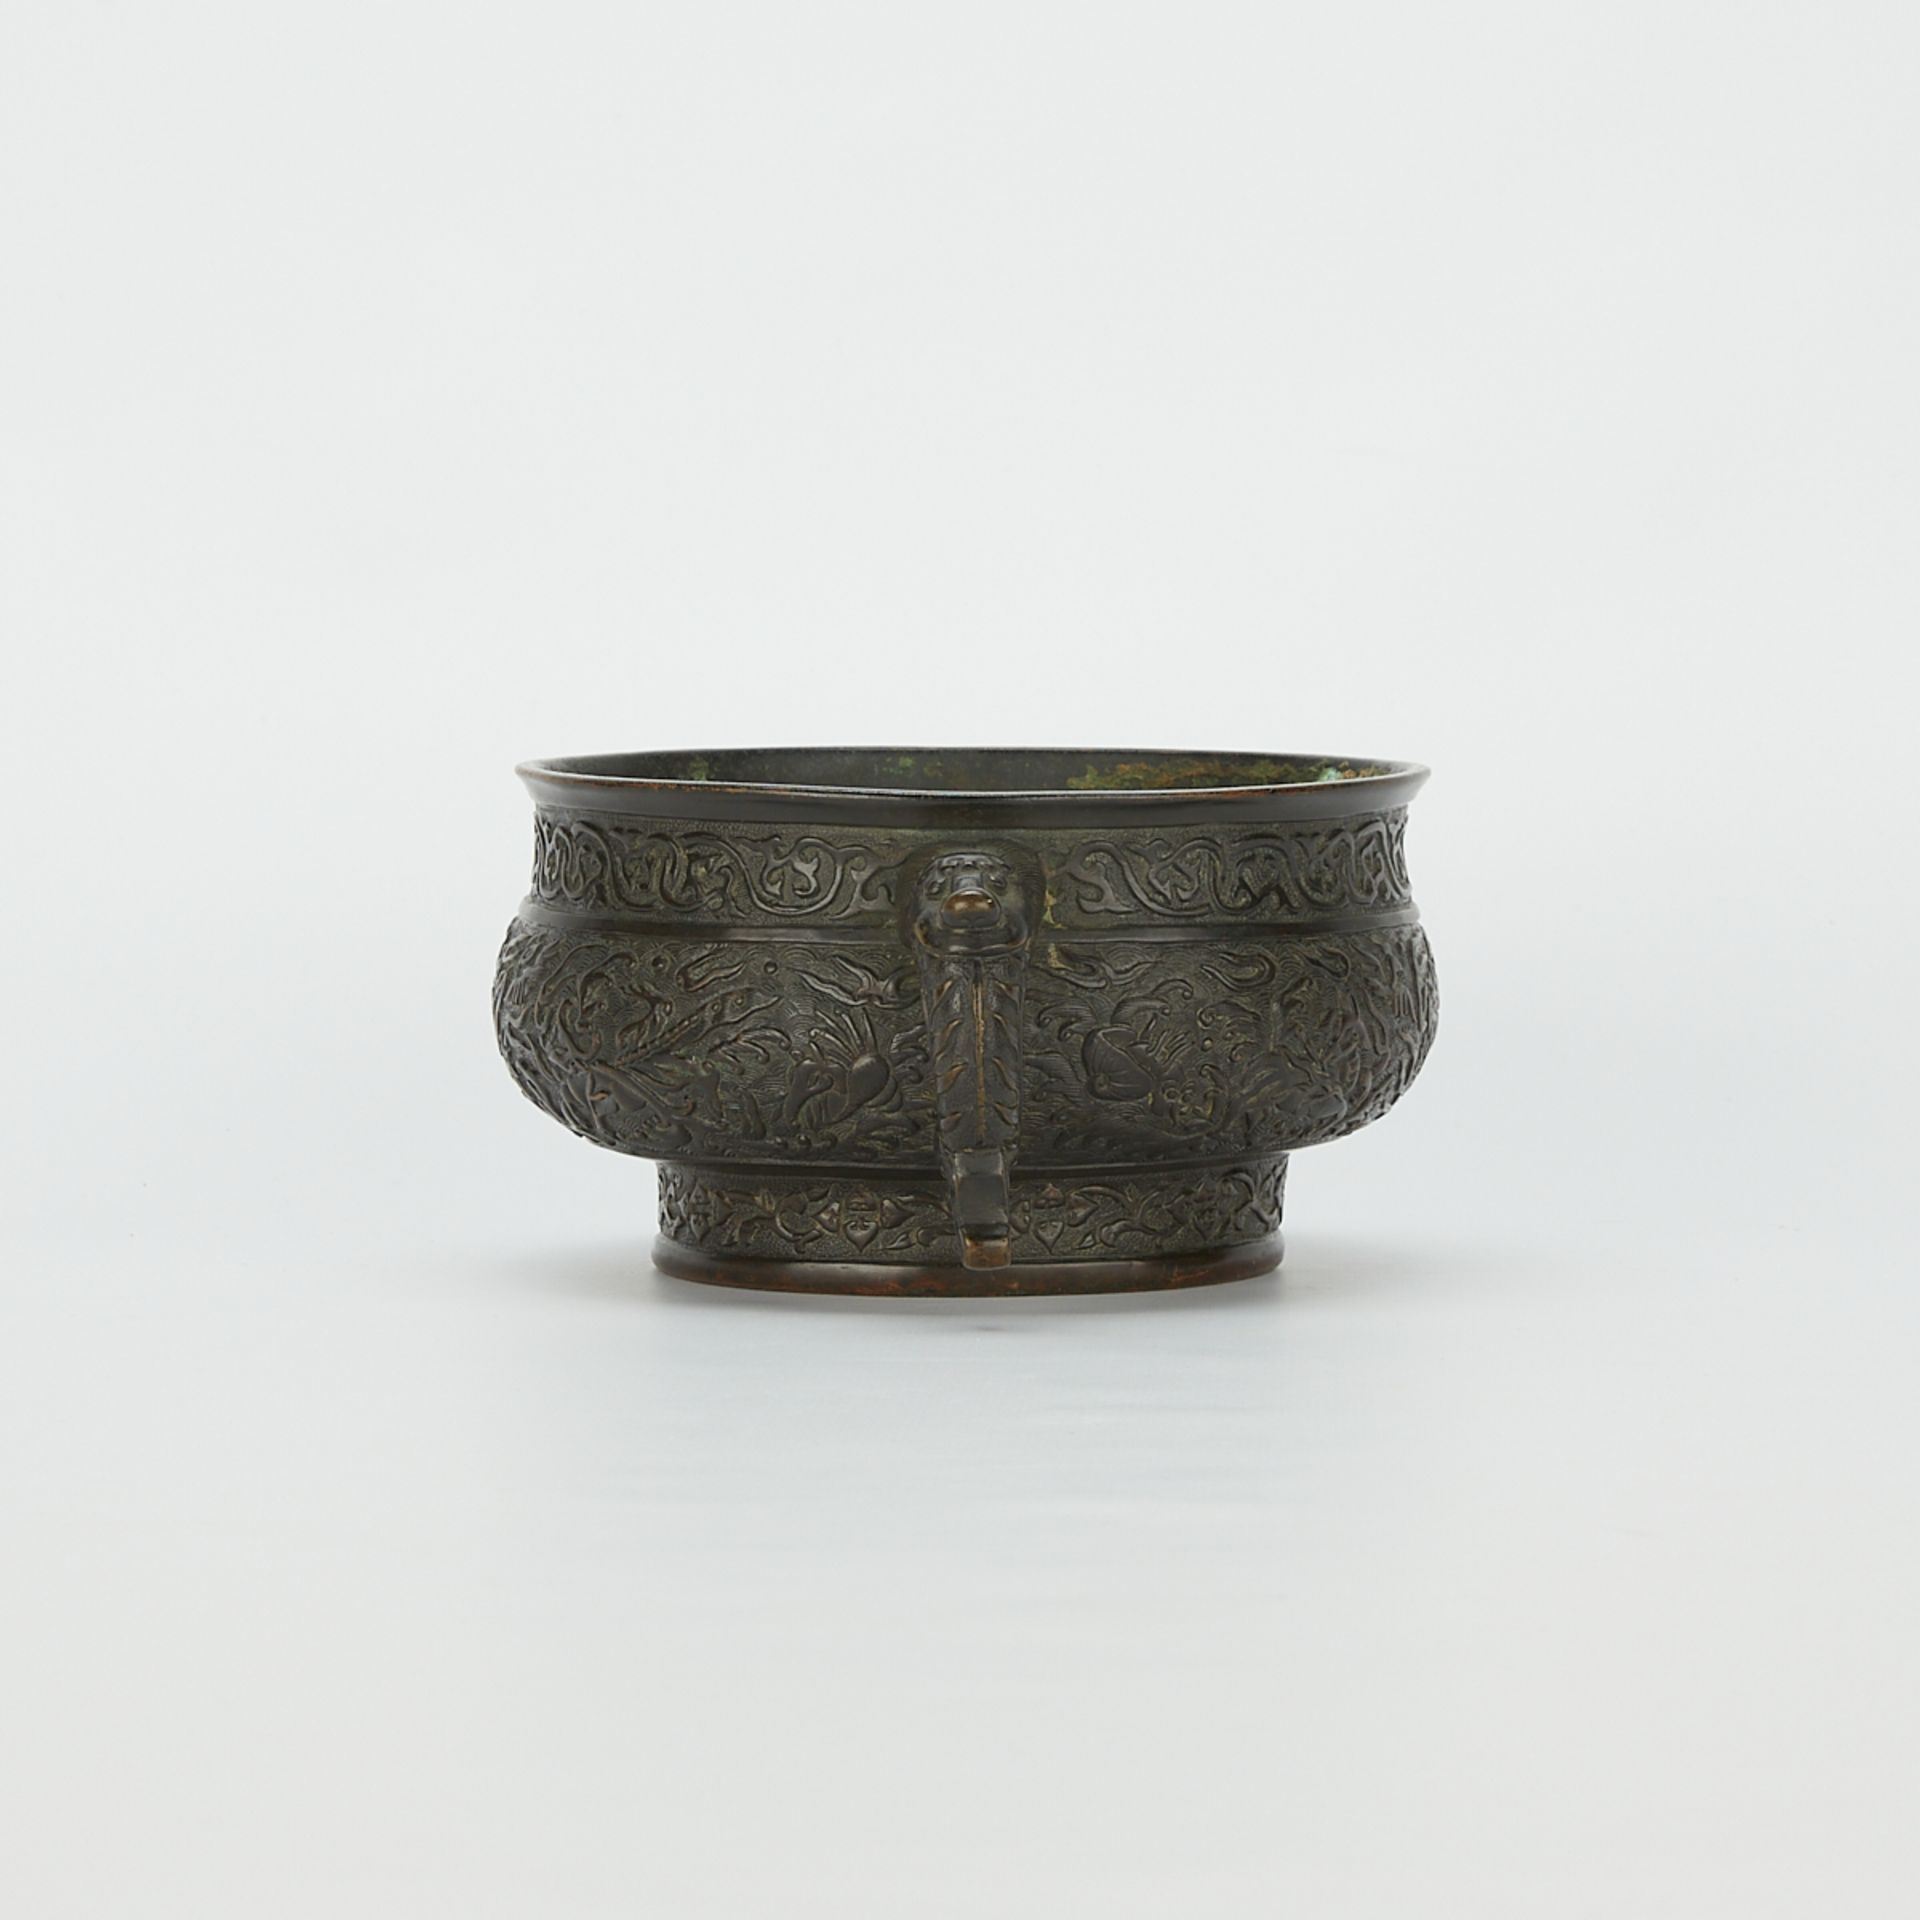 17th c. Chinese Bronze Mythical Beast Censer - Image 6 of 12